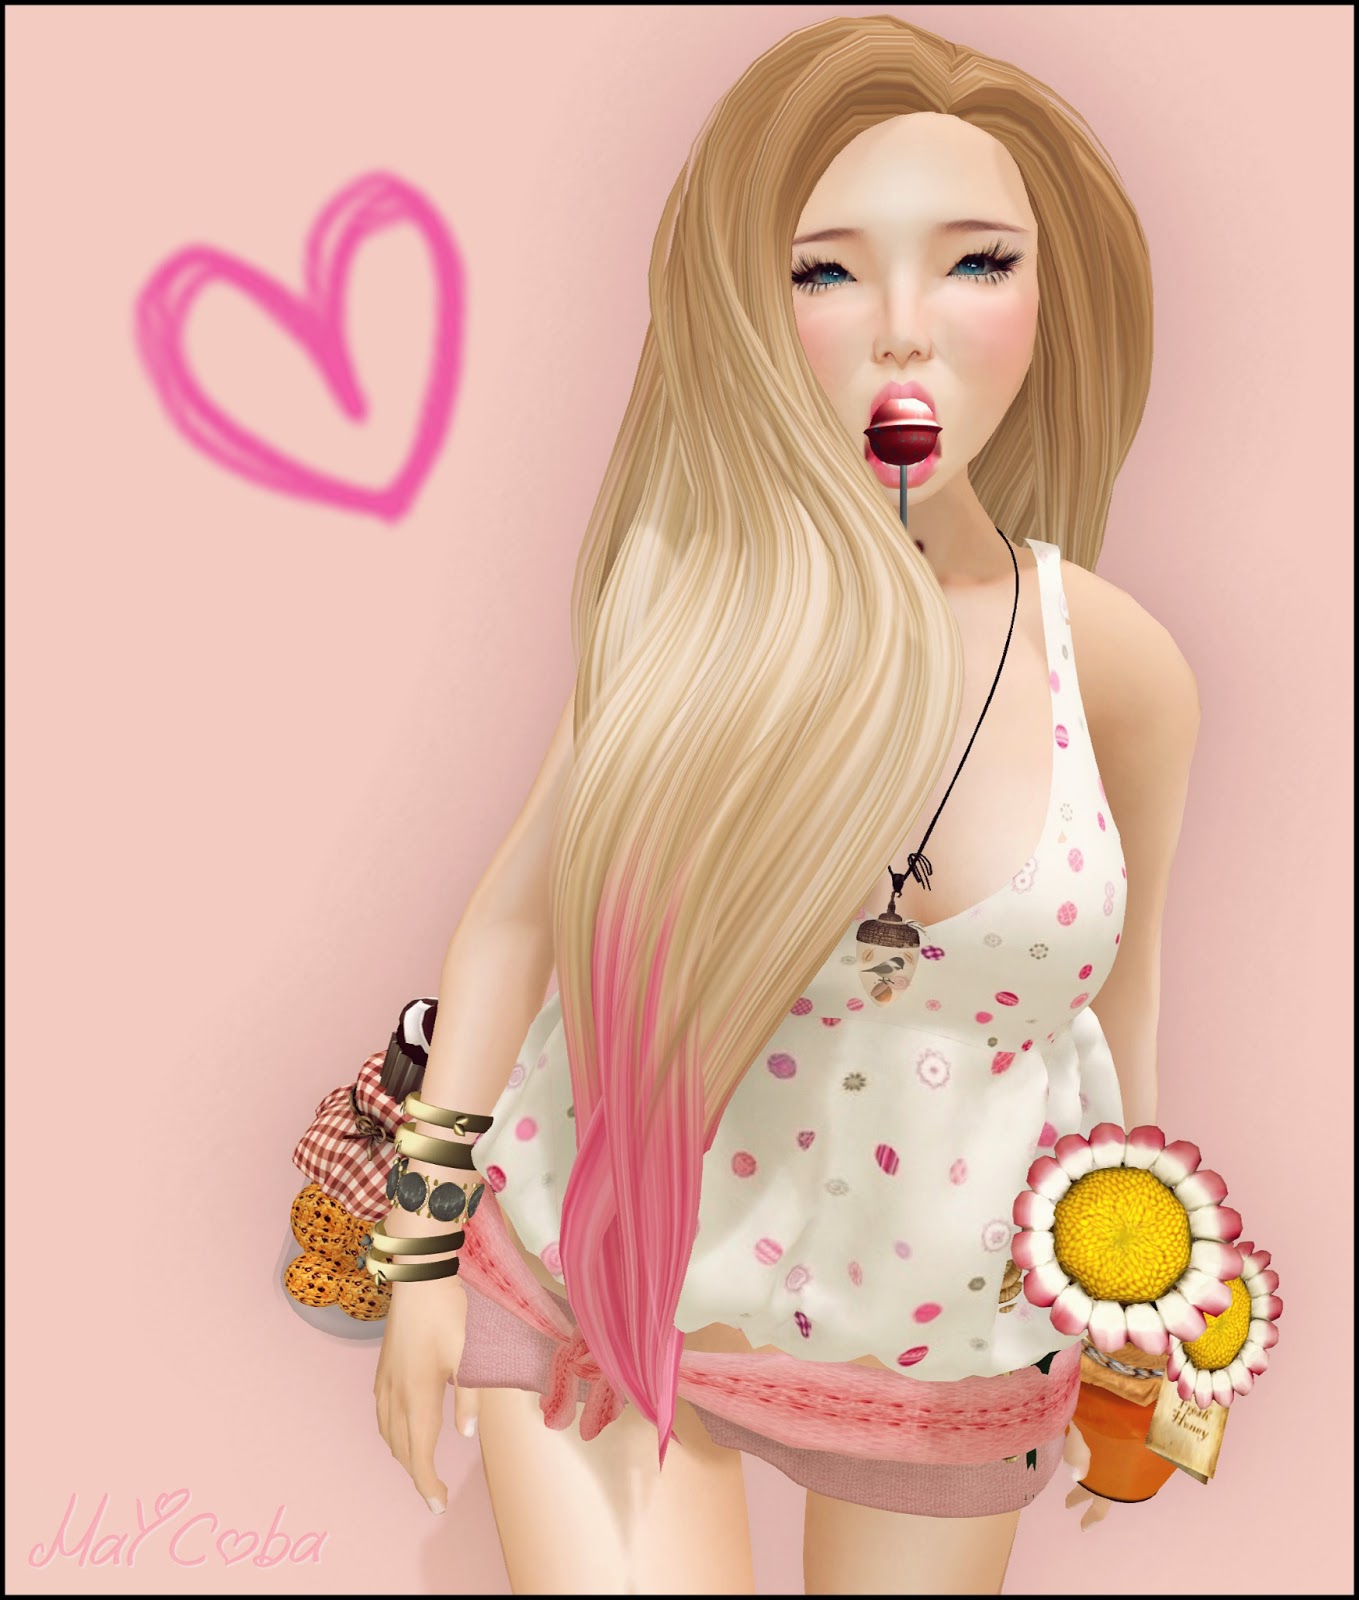 Download this Candy Girl picture